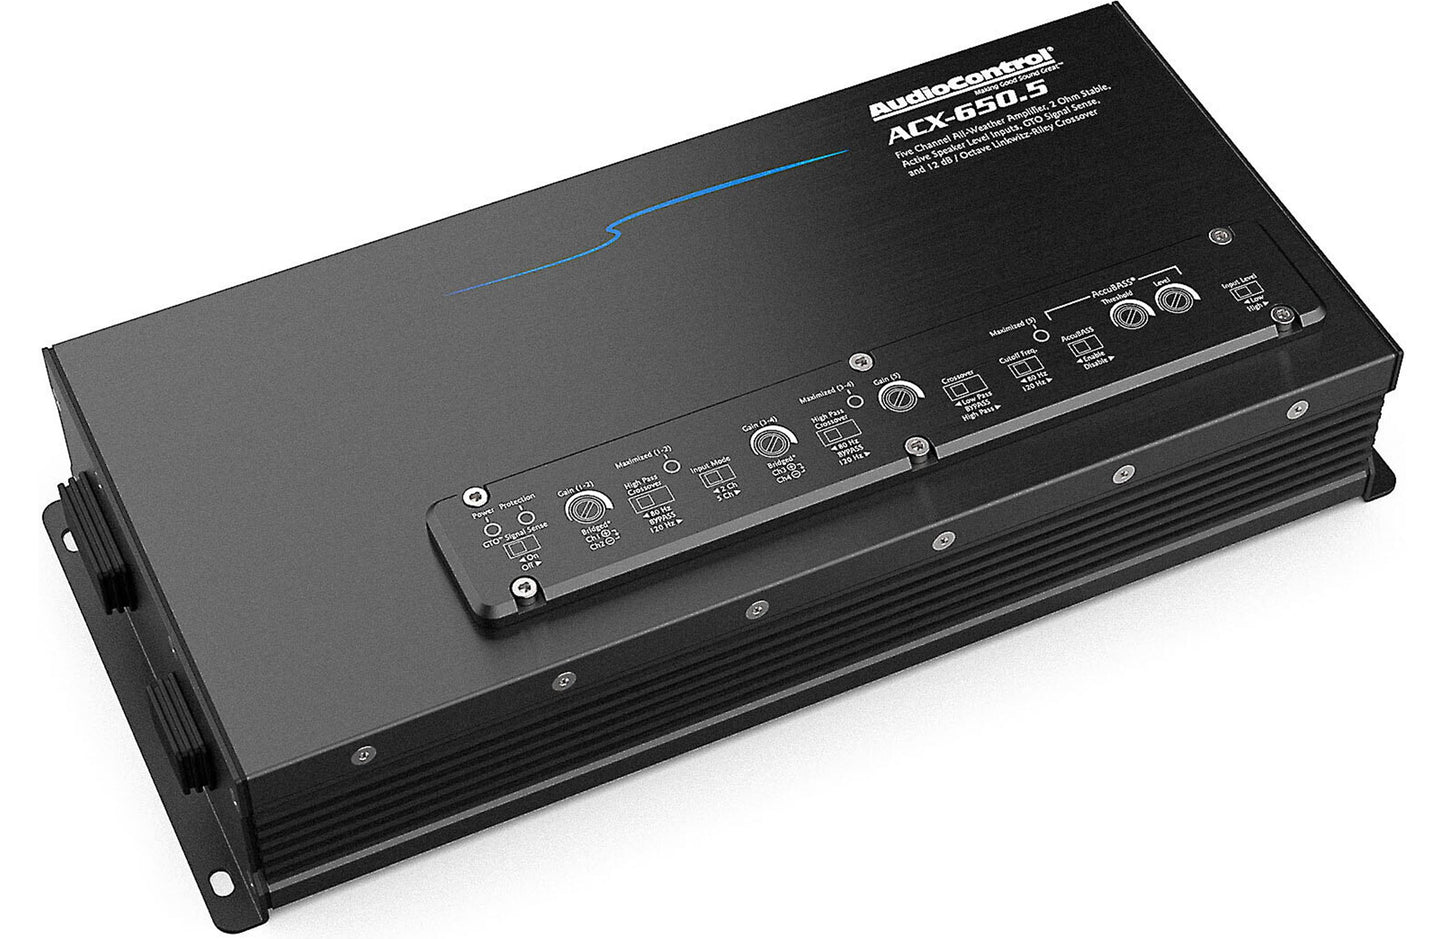 AudioControl ACX-650.5 5-channel powersports/marine amplifier — 50 watts RMS x 4 at 4 ohms + 350 watts RMS x 1 at 2 ohms